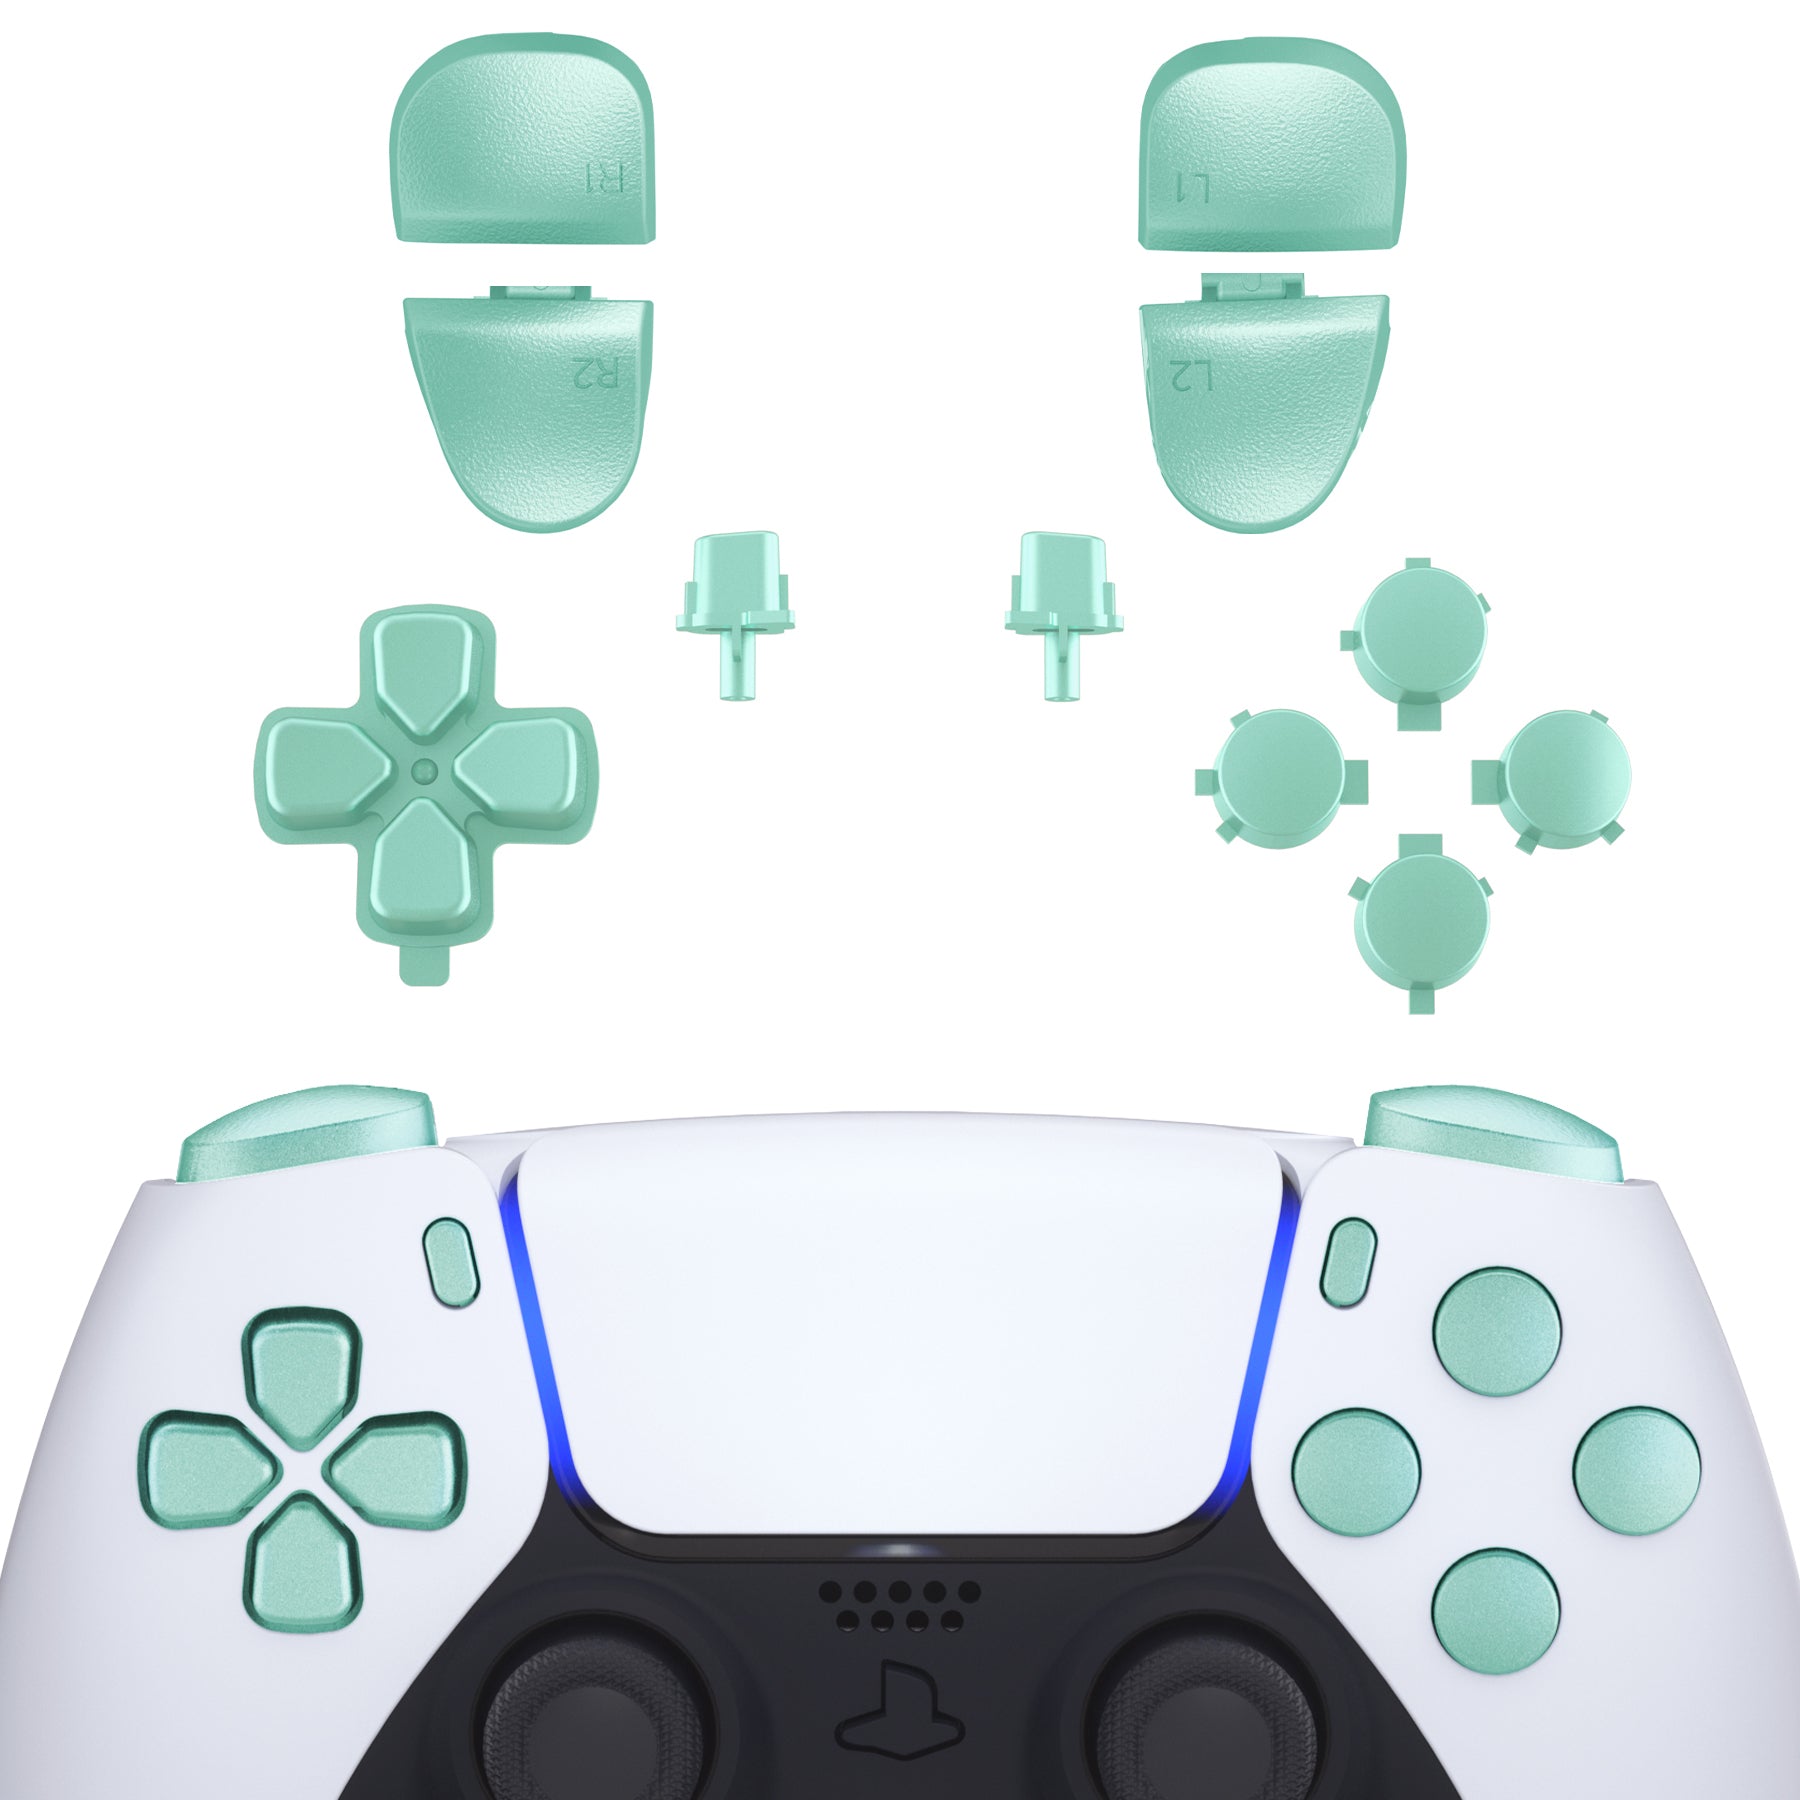 eXtremeRate Retail Replacement D-pad R1 L1 R2 L2 Triggers Share Options Face Buttons, Metallic Vista Green Full Set Buttons Compatible with ps5 Controller BDM-030 - JPF1044G3